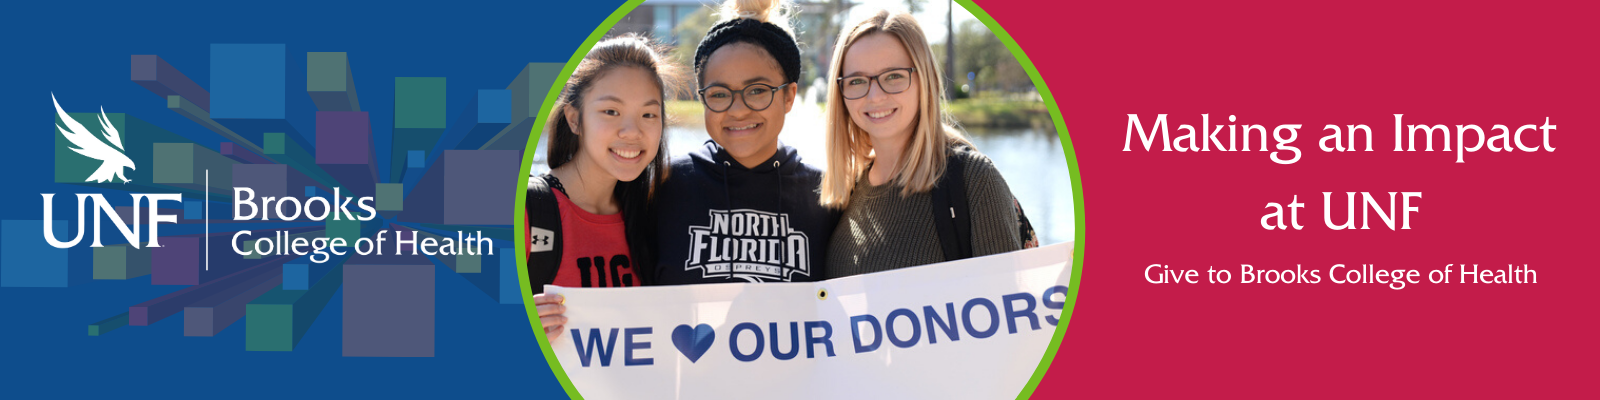 brooks making an impact at unf with students holding a we love donors banner